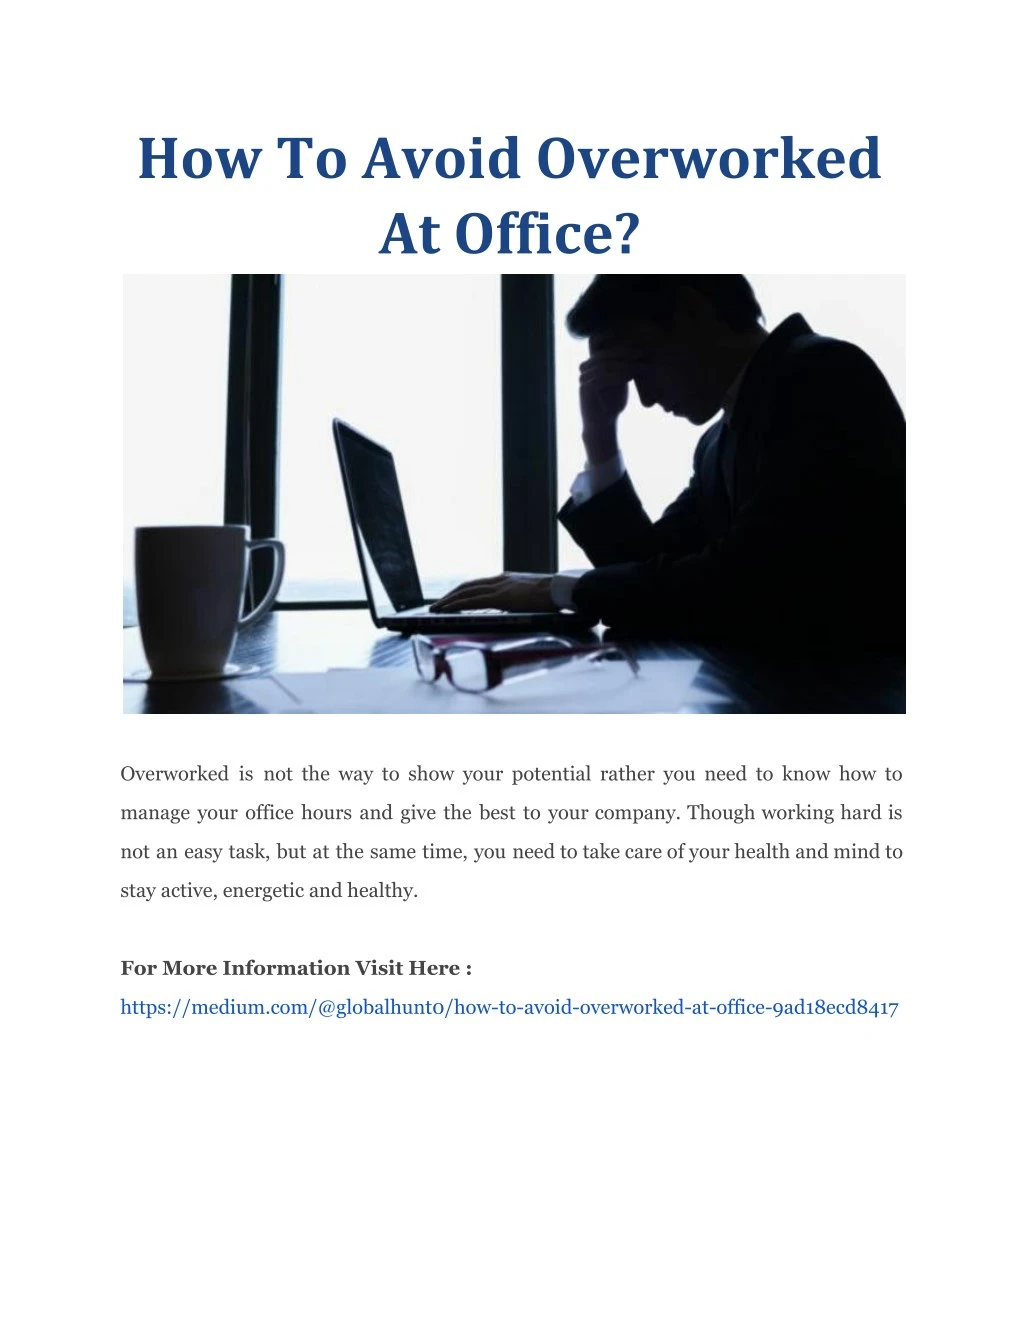 how to avoid overworked at office